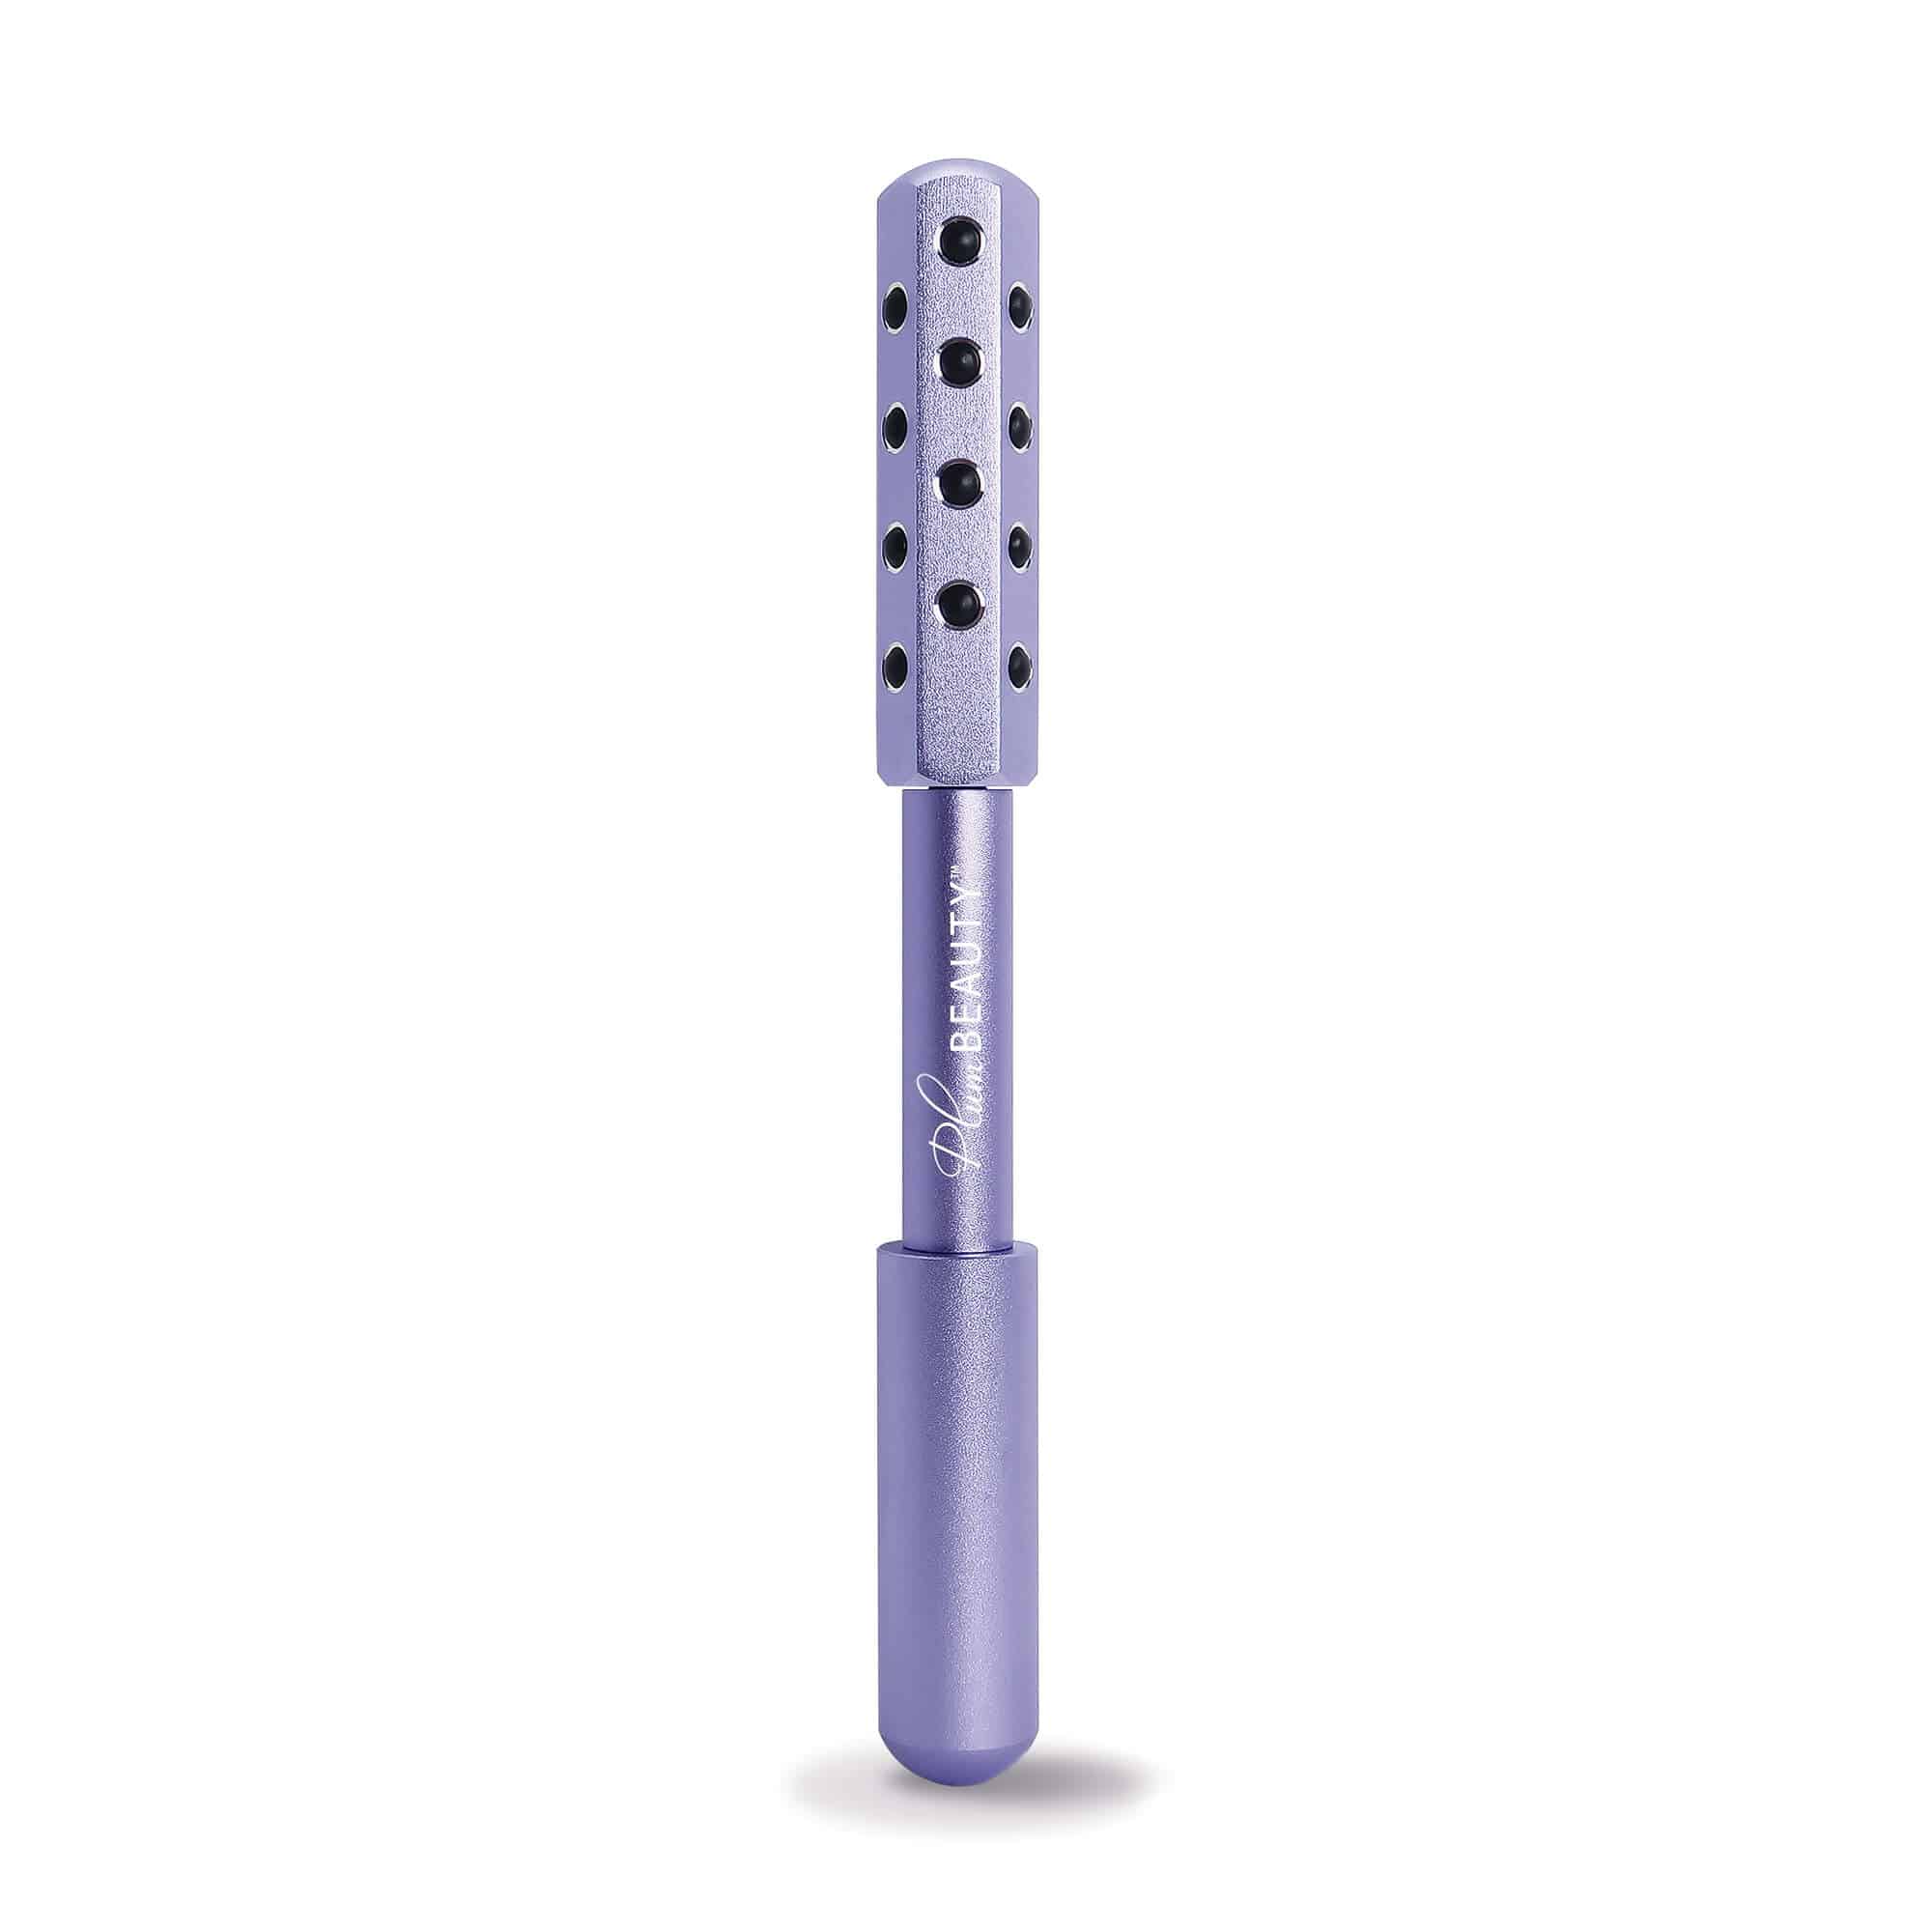 Rollerball Massager To Treat Aches At Home - Inspire Uplift